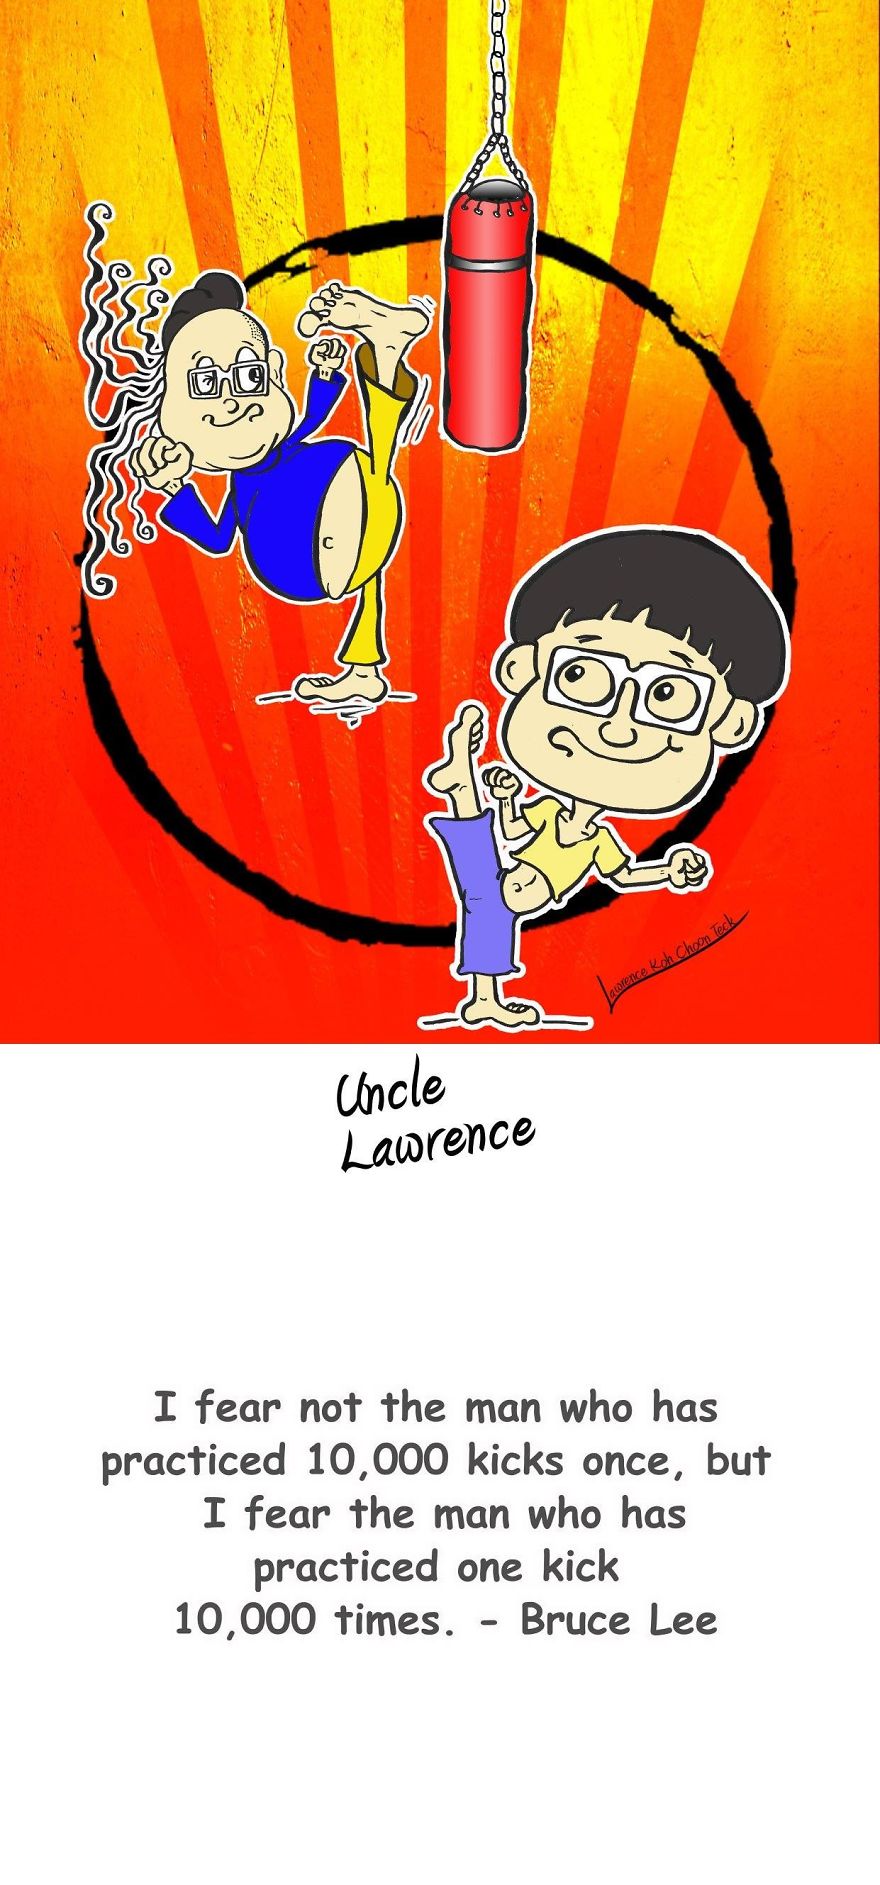 Completed A Family Comic Book "Uncle Lawrence" After 2 Years. Posted Most Of The Comics For Your Viewing Pleasure.